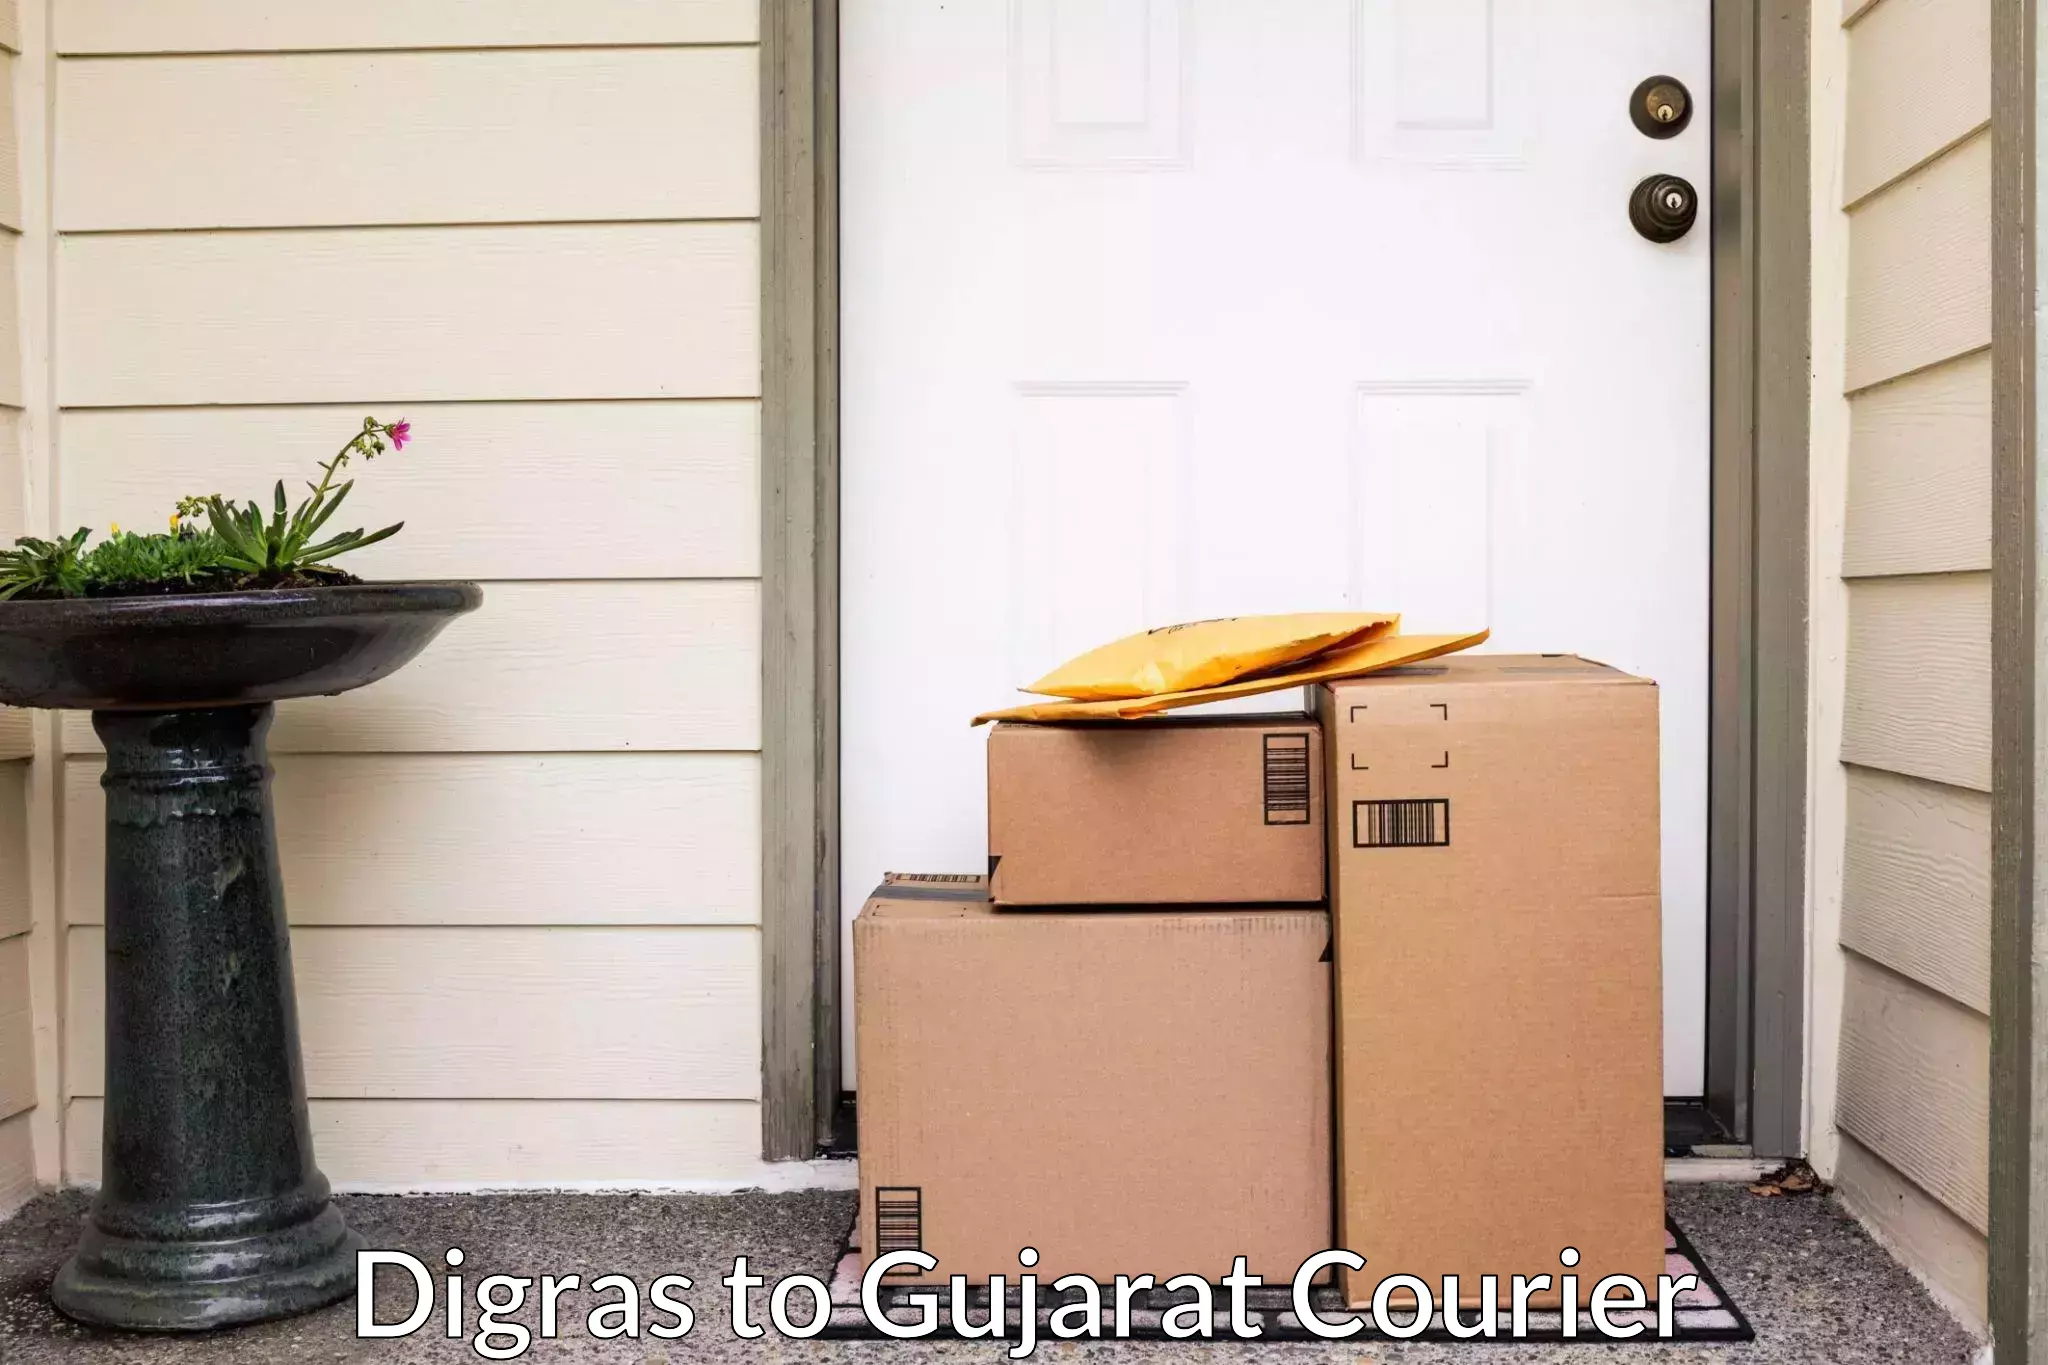 Hassle-free relocation Digras to Patan Gujarat